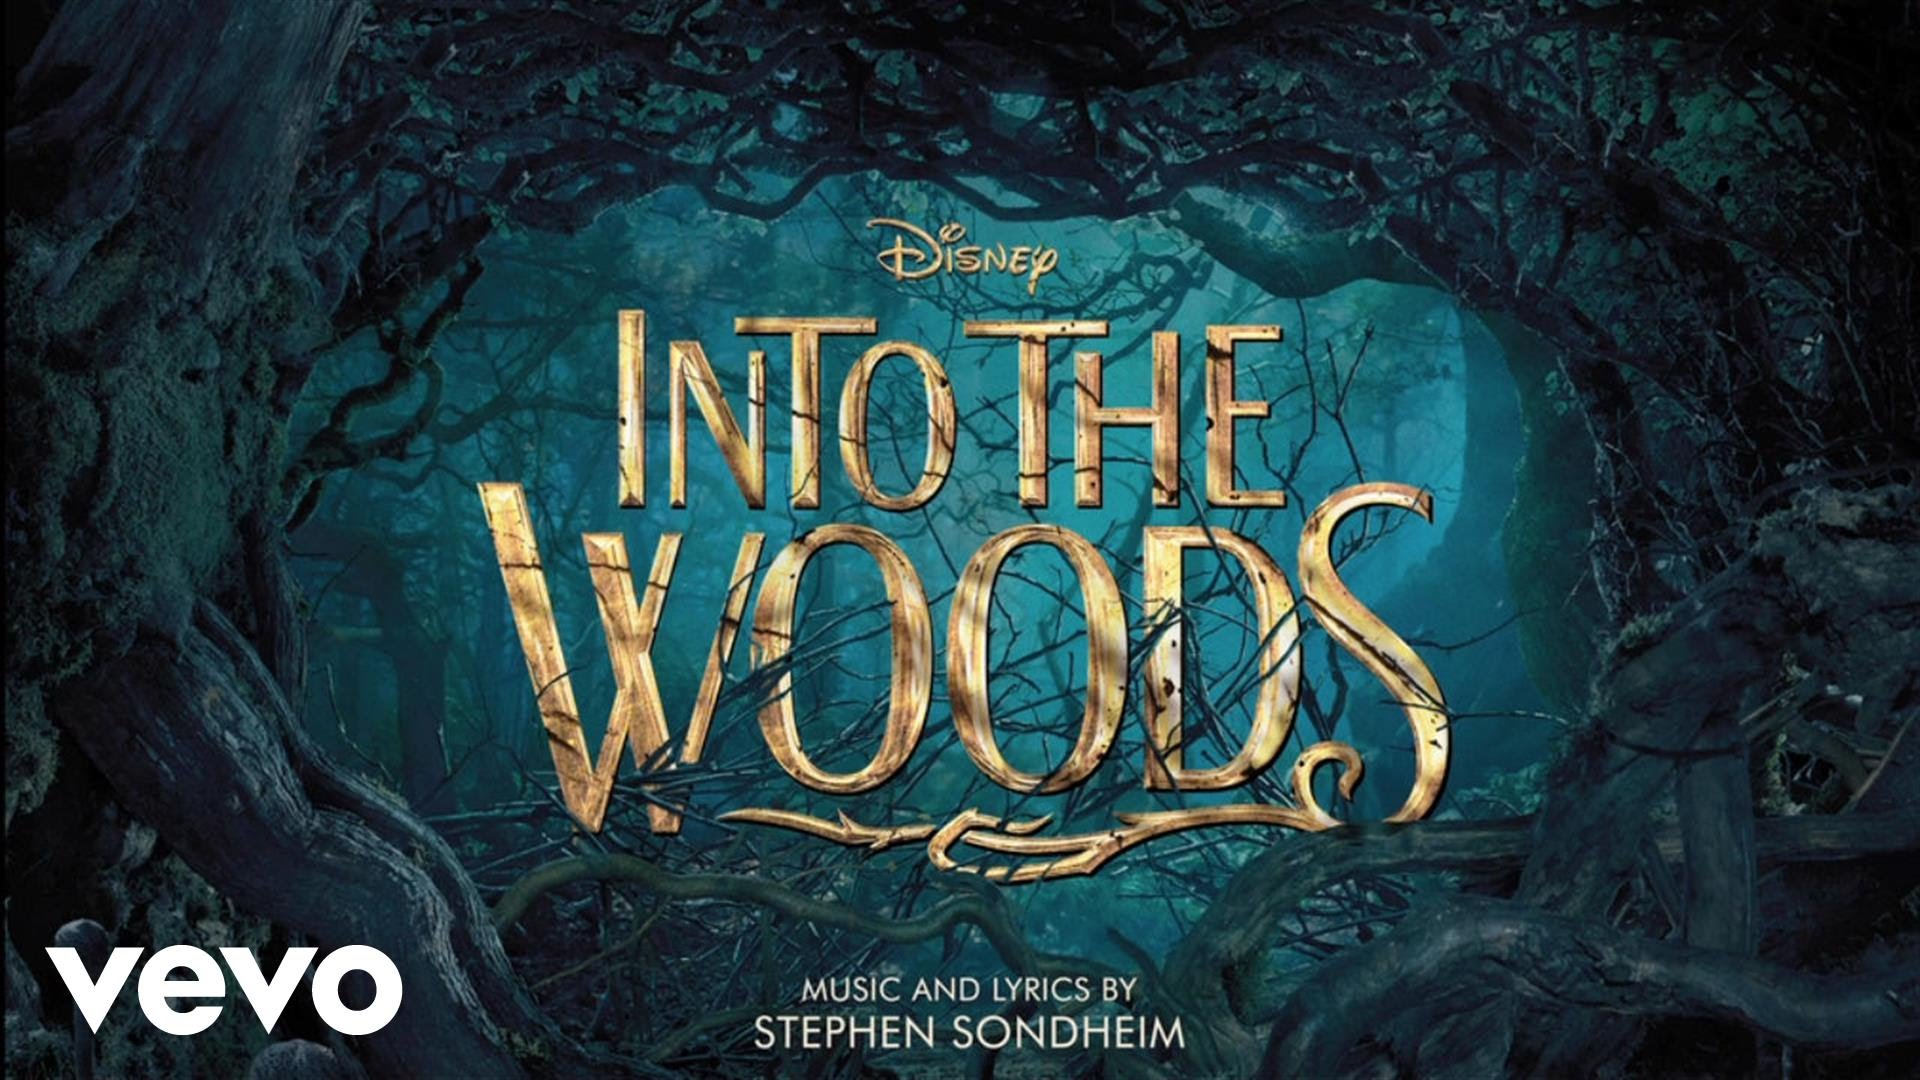 Into the woods photo